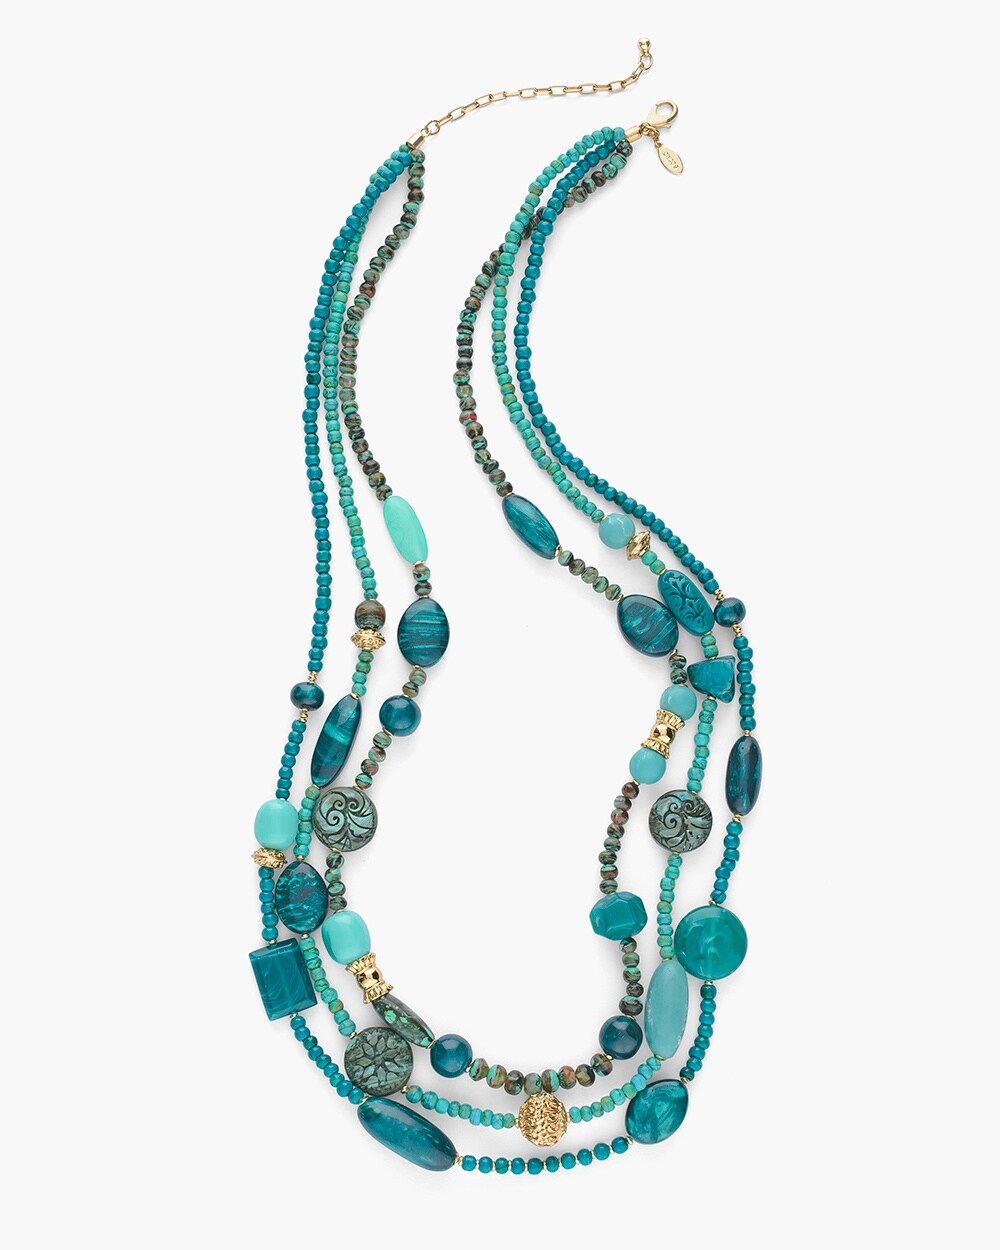 Long Teal Multi-Strand Necklace